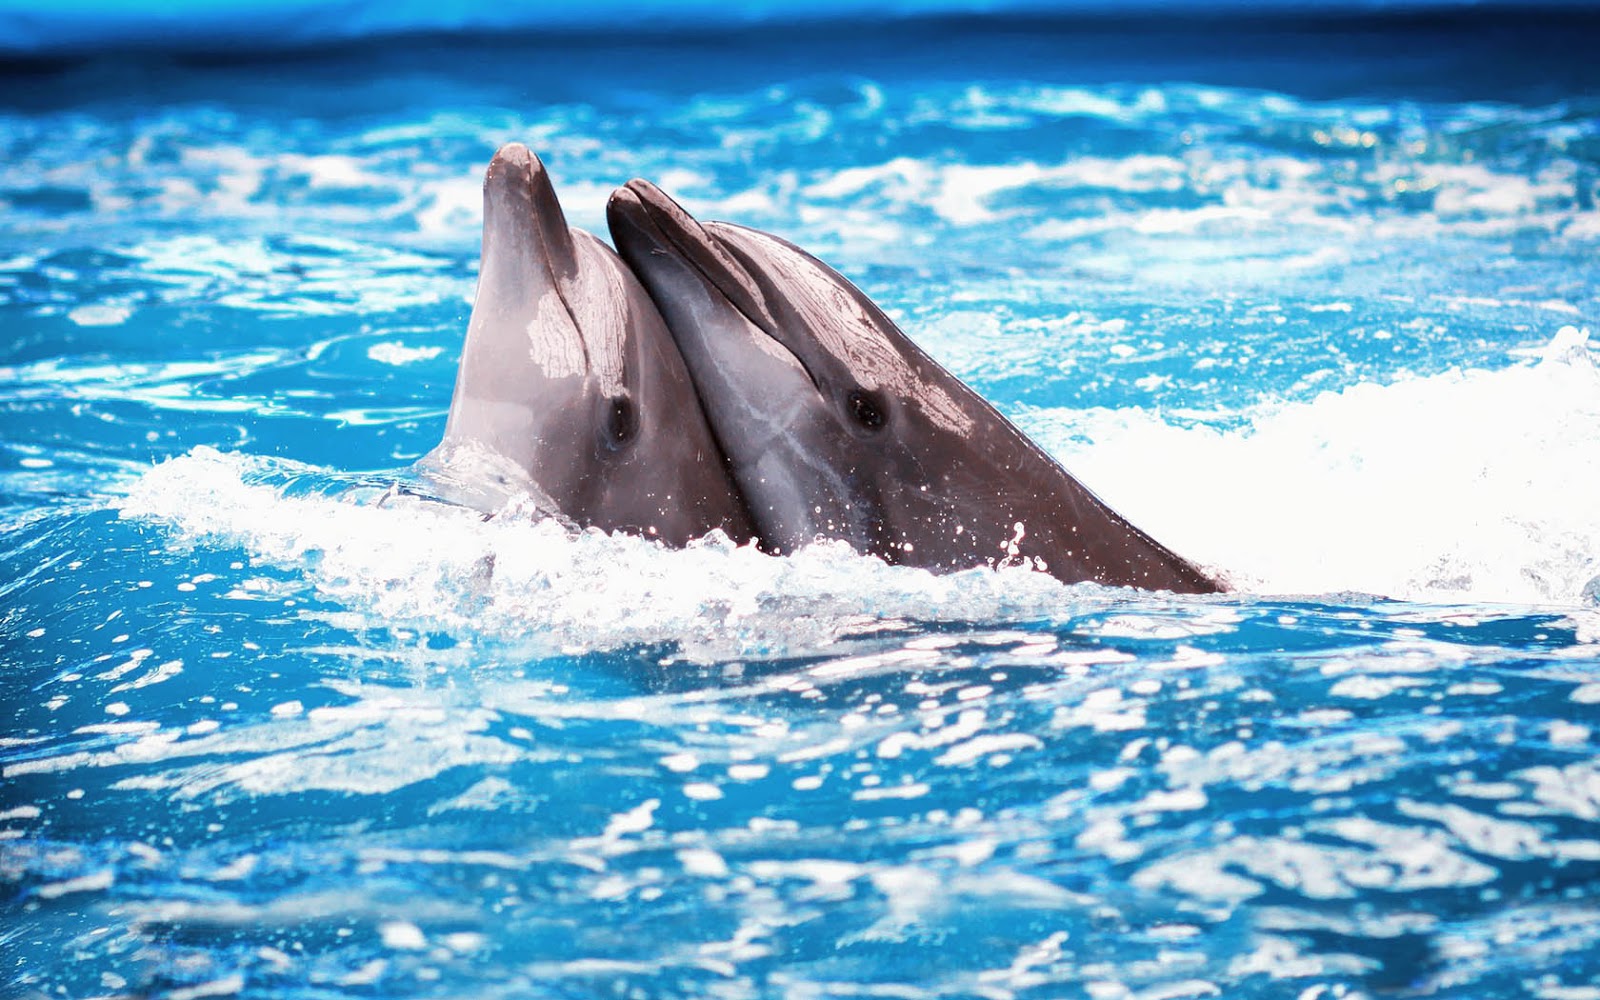 Wallpaper With Two Cuddling Dolphins In The Swimming - Dolphin Kiss - HD Wallpaper 